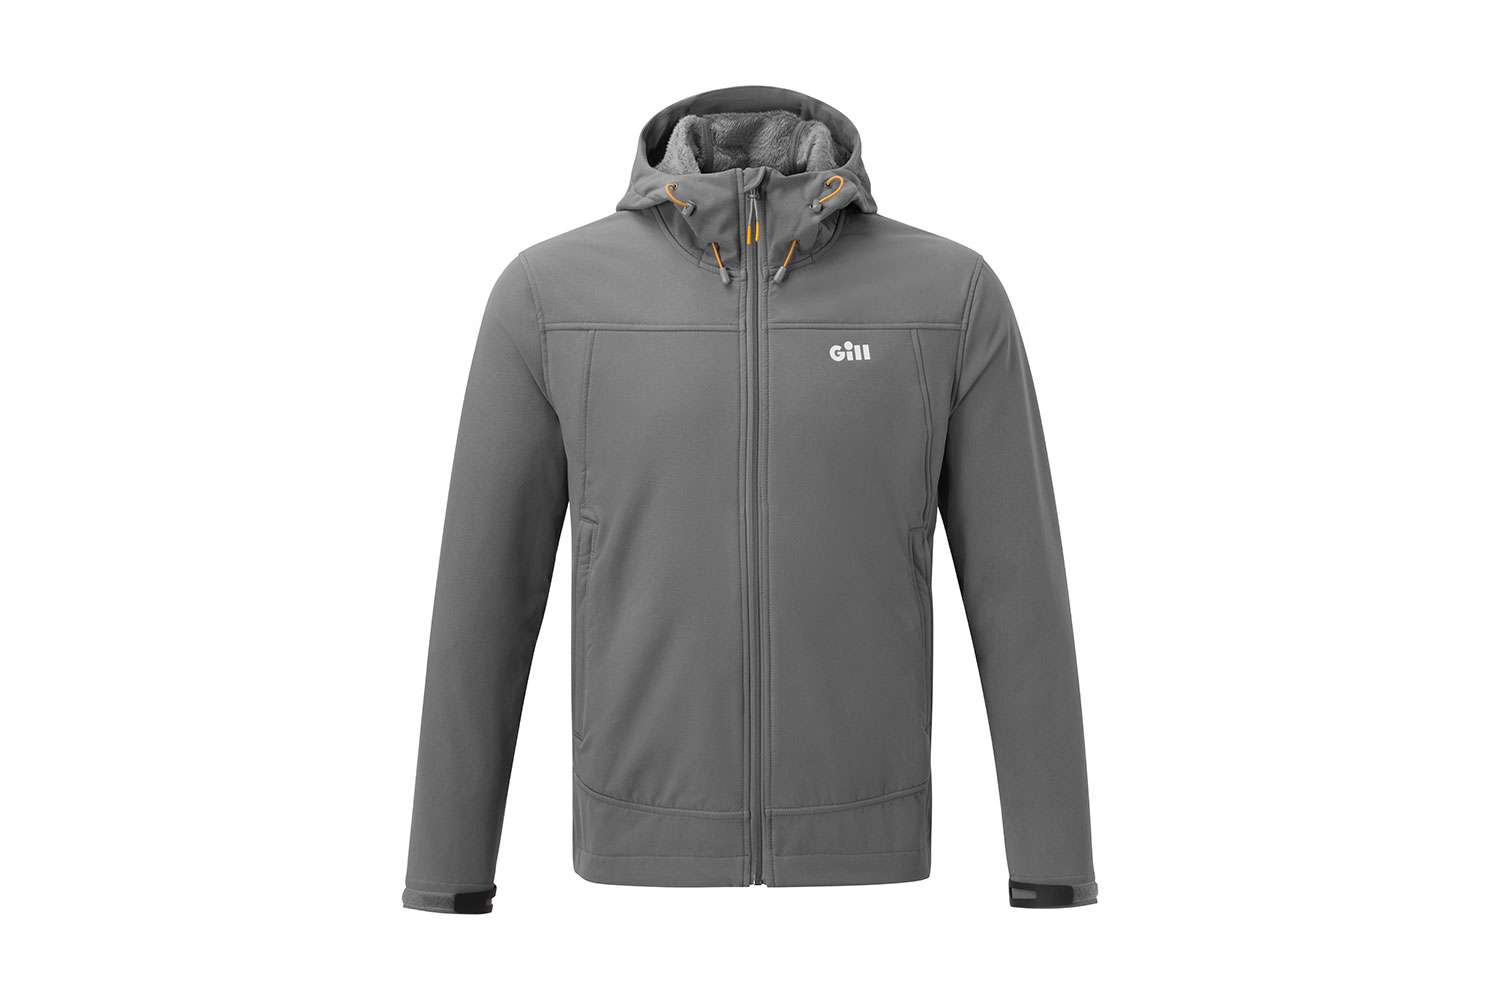    <B> Gill Rock Softshell Jacket</B>
<BR>While seemingly oxymoronic, this jacket is both hard as a rock, yet soft, like a softshell should be. This innovative jacket is comprised of a 2-layer stretch softshell fabric with a durable outer face and hi-loft thermal lining as well as 7-percent spandex for added flexibility while casting. The Rock Softshell features adjustable cuffs and hem for added comfort and fit as well as a draw cord adjustable hood. 
<BR>
<B>MSRP: $175</B>

<BR>
<a href=